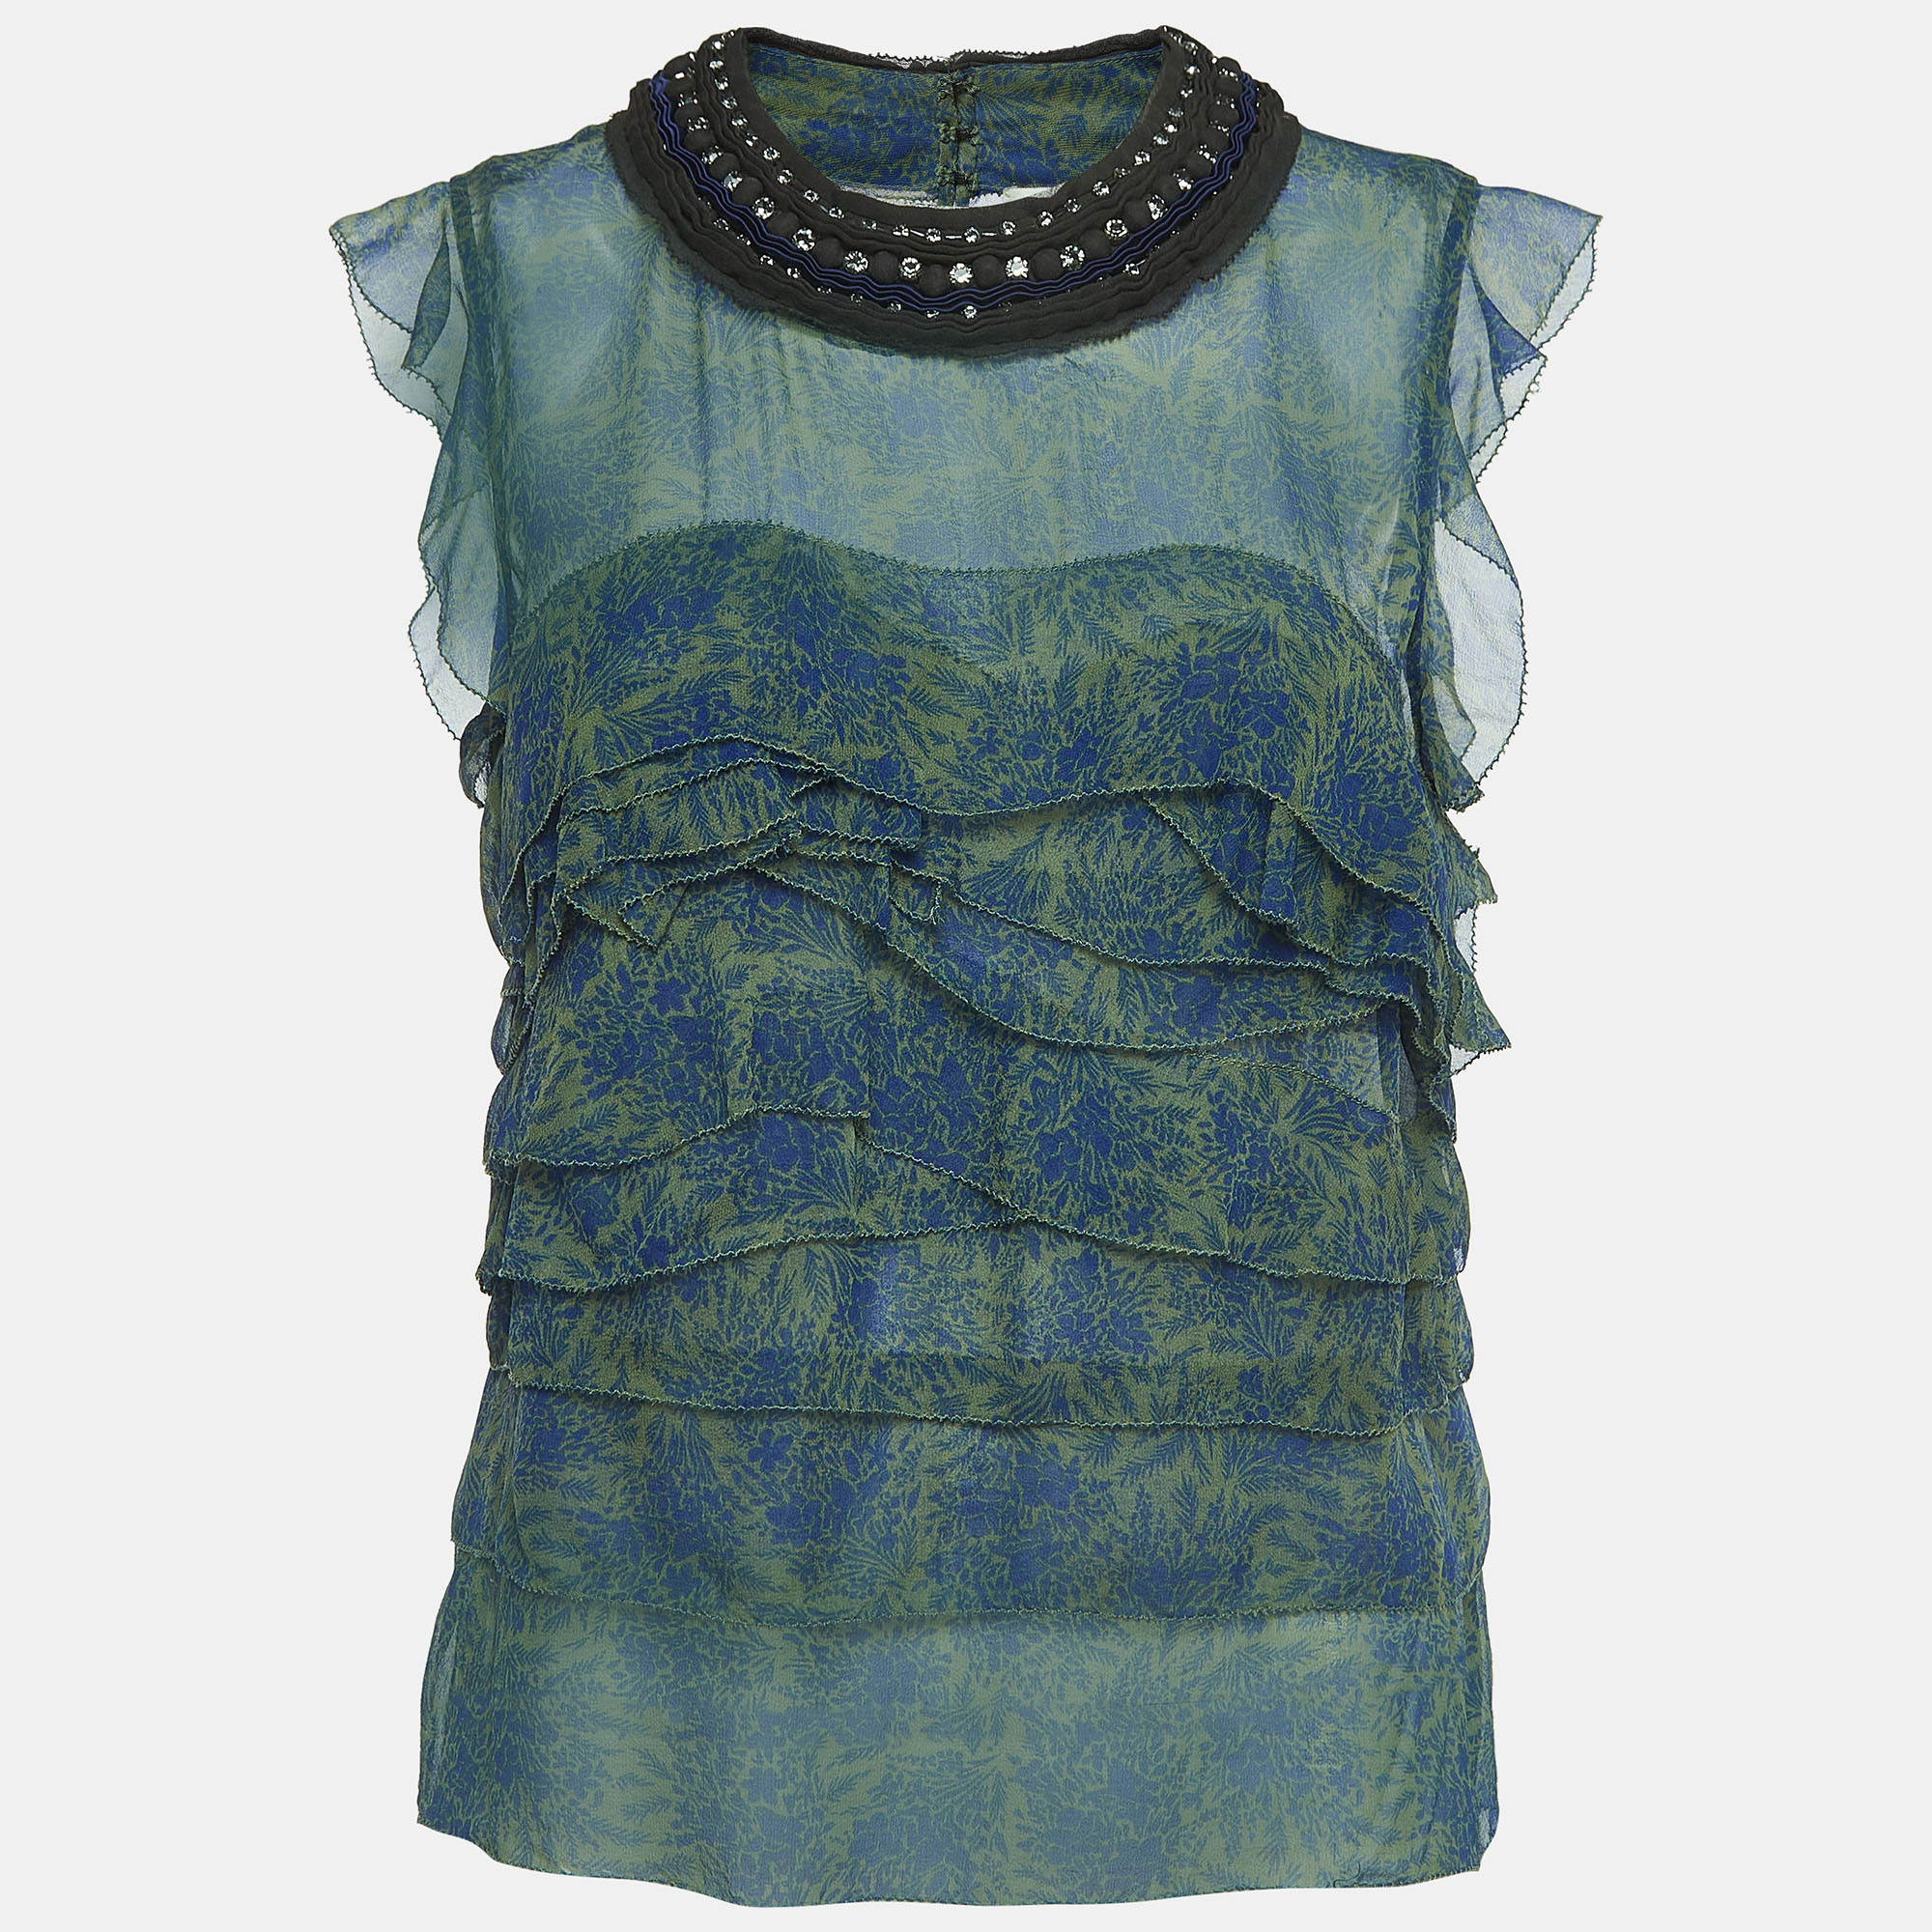 3.1 Phillip Lim Green Printed Chiffon Embellished Top S